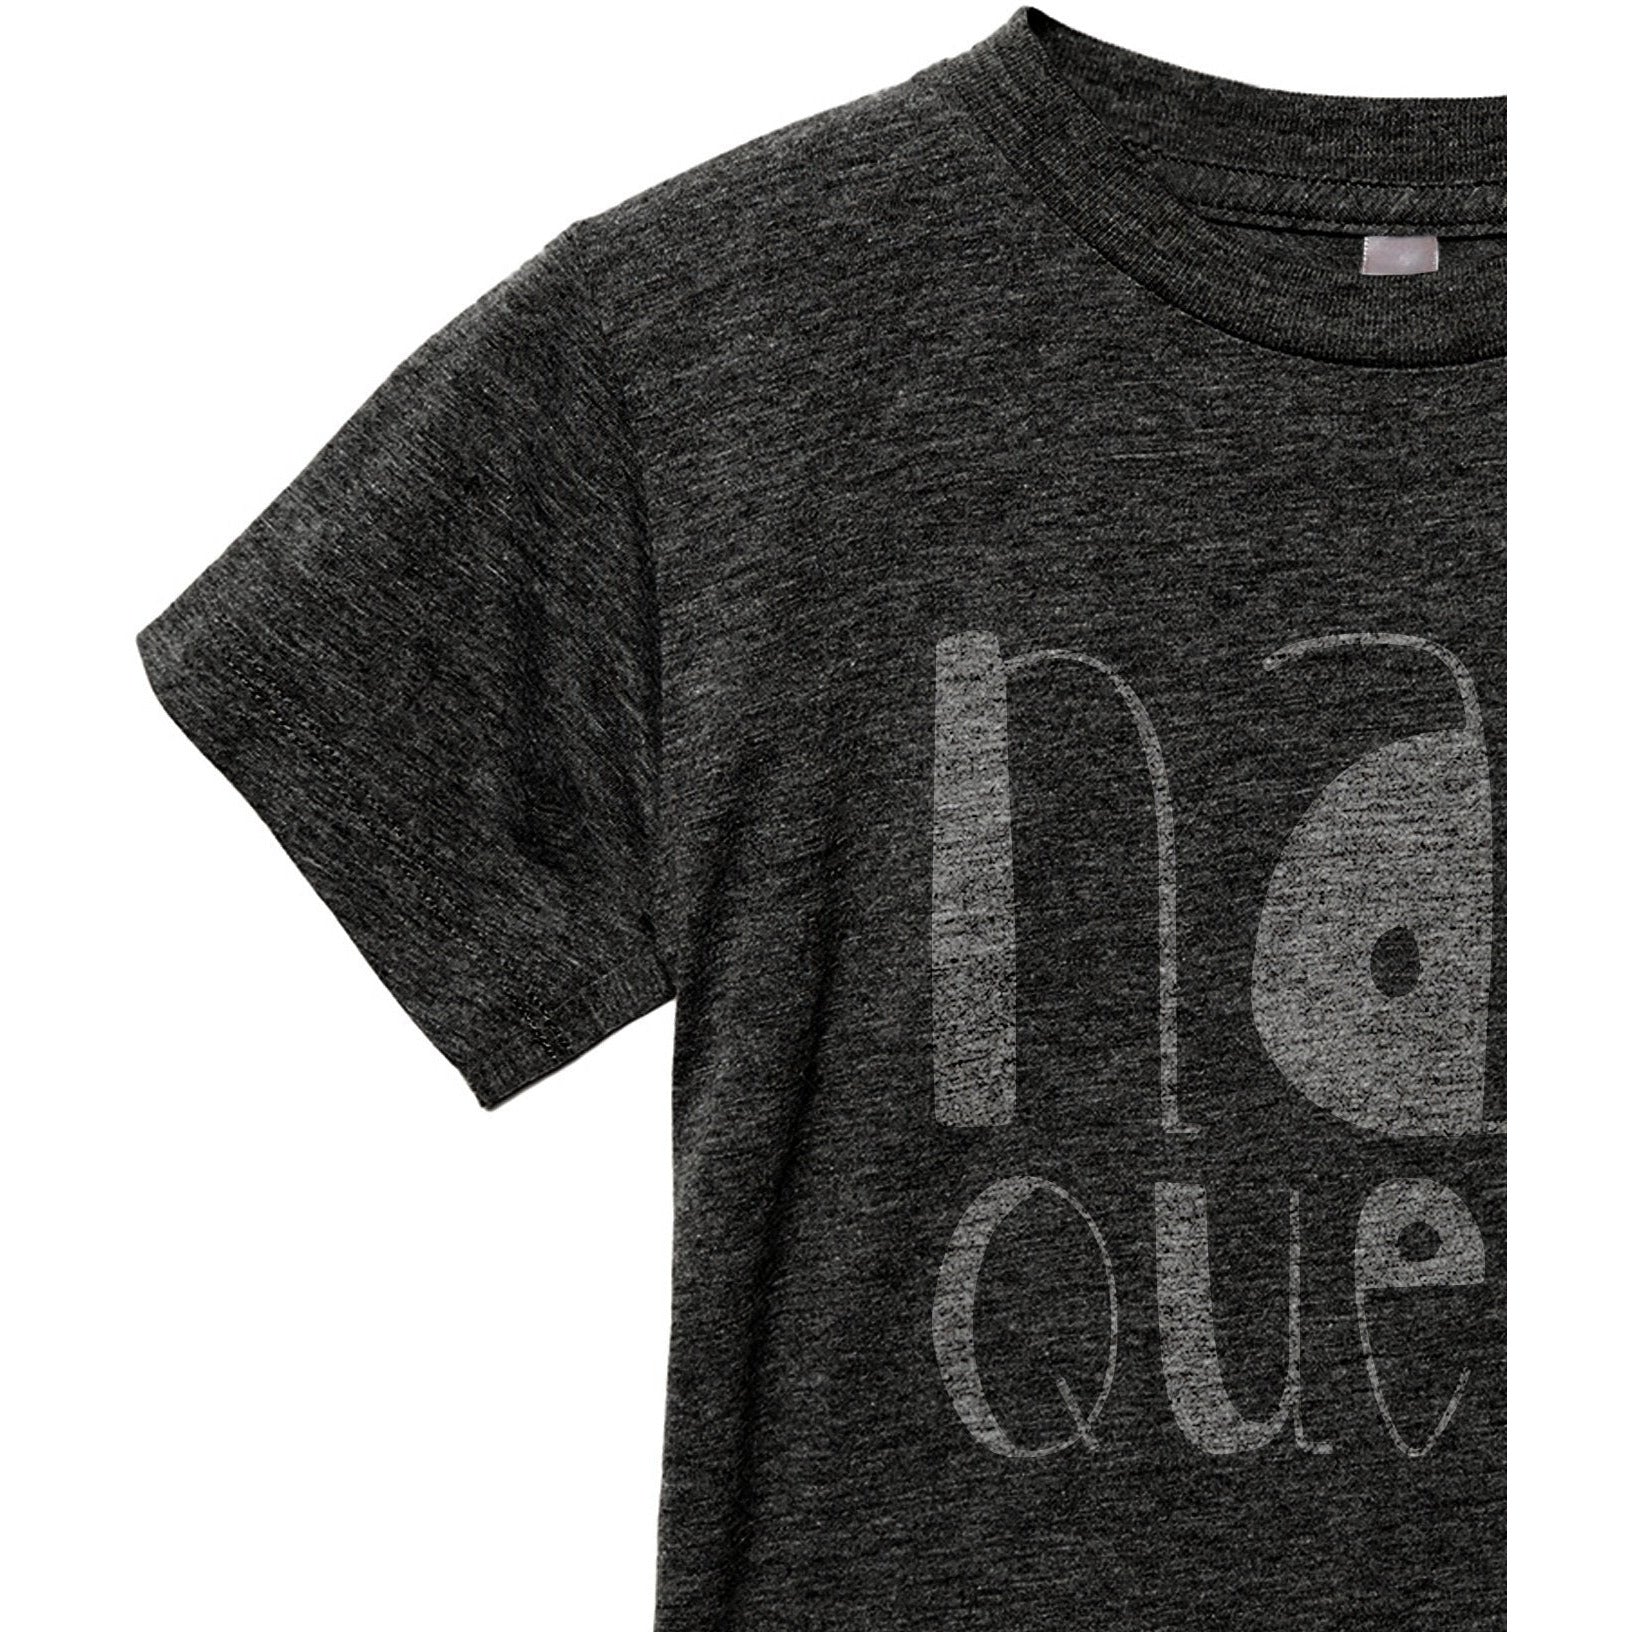 Nap Queen Toddler's Go-To Crewneck Tee Heather Grey Close Up Sleeves Collar Details
